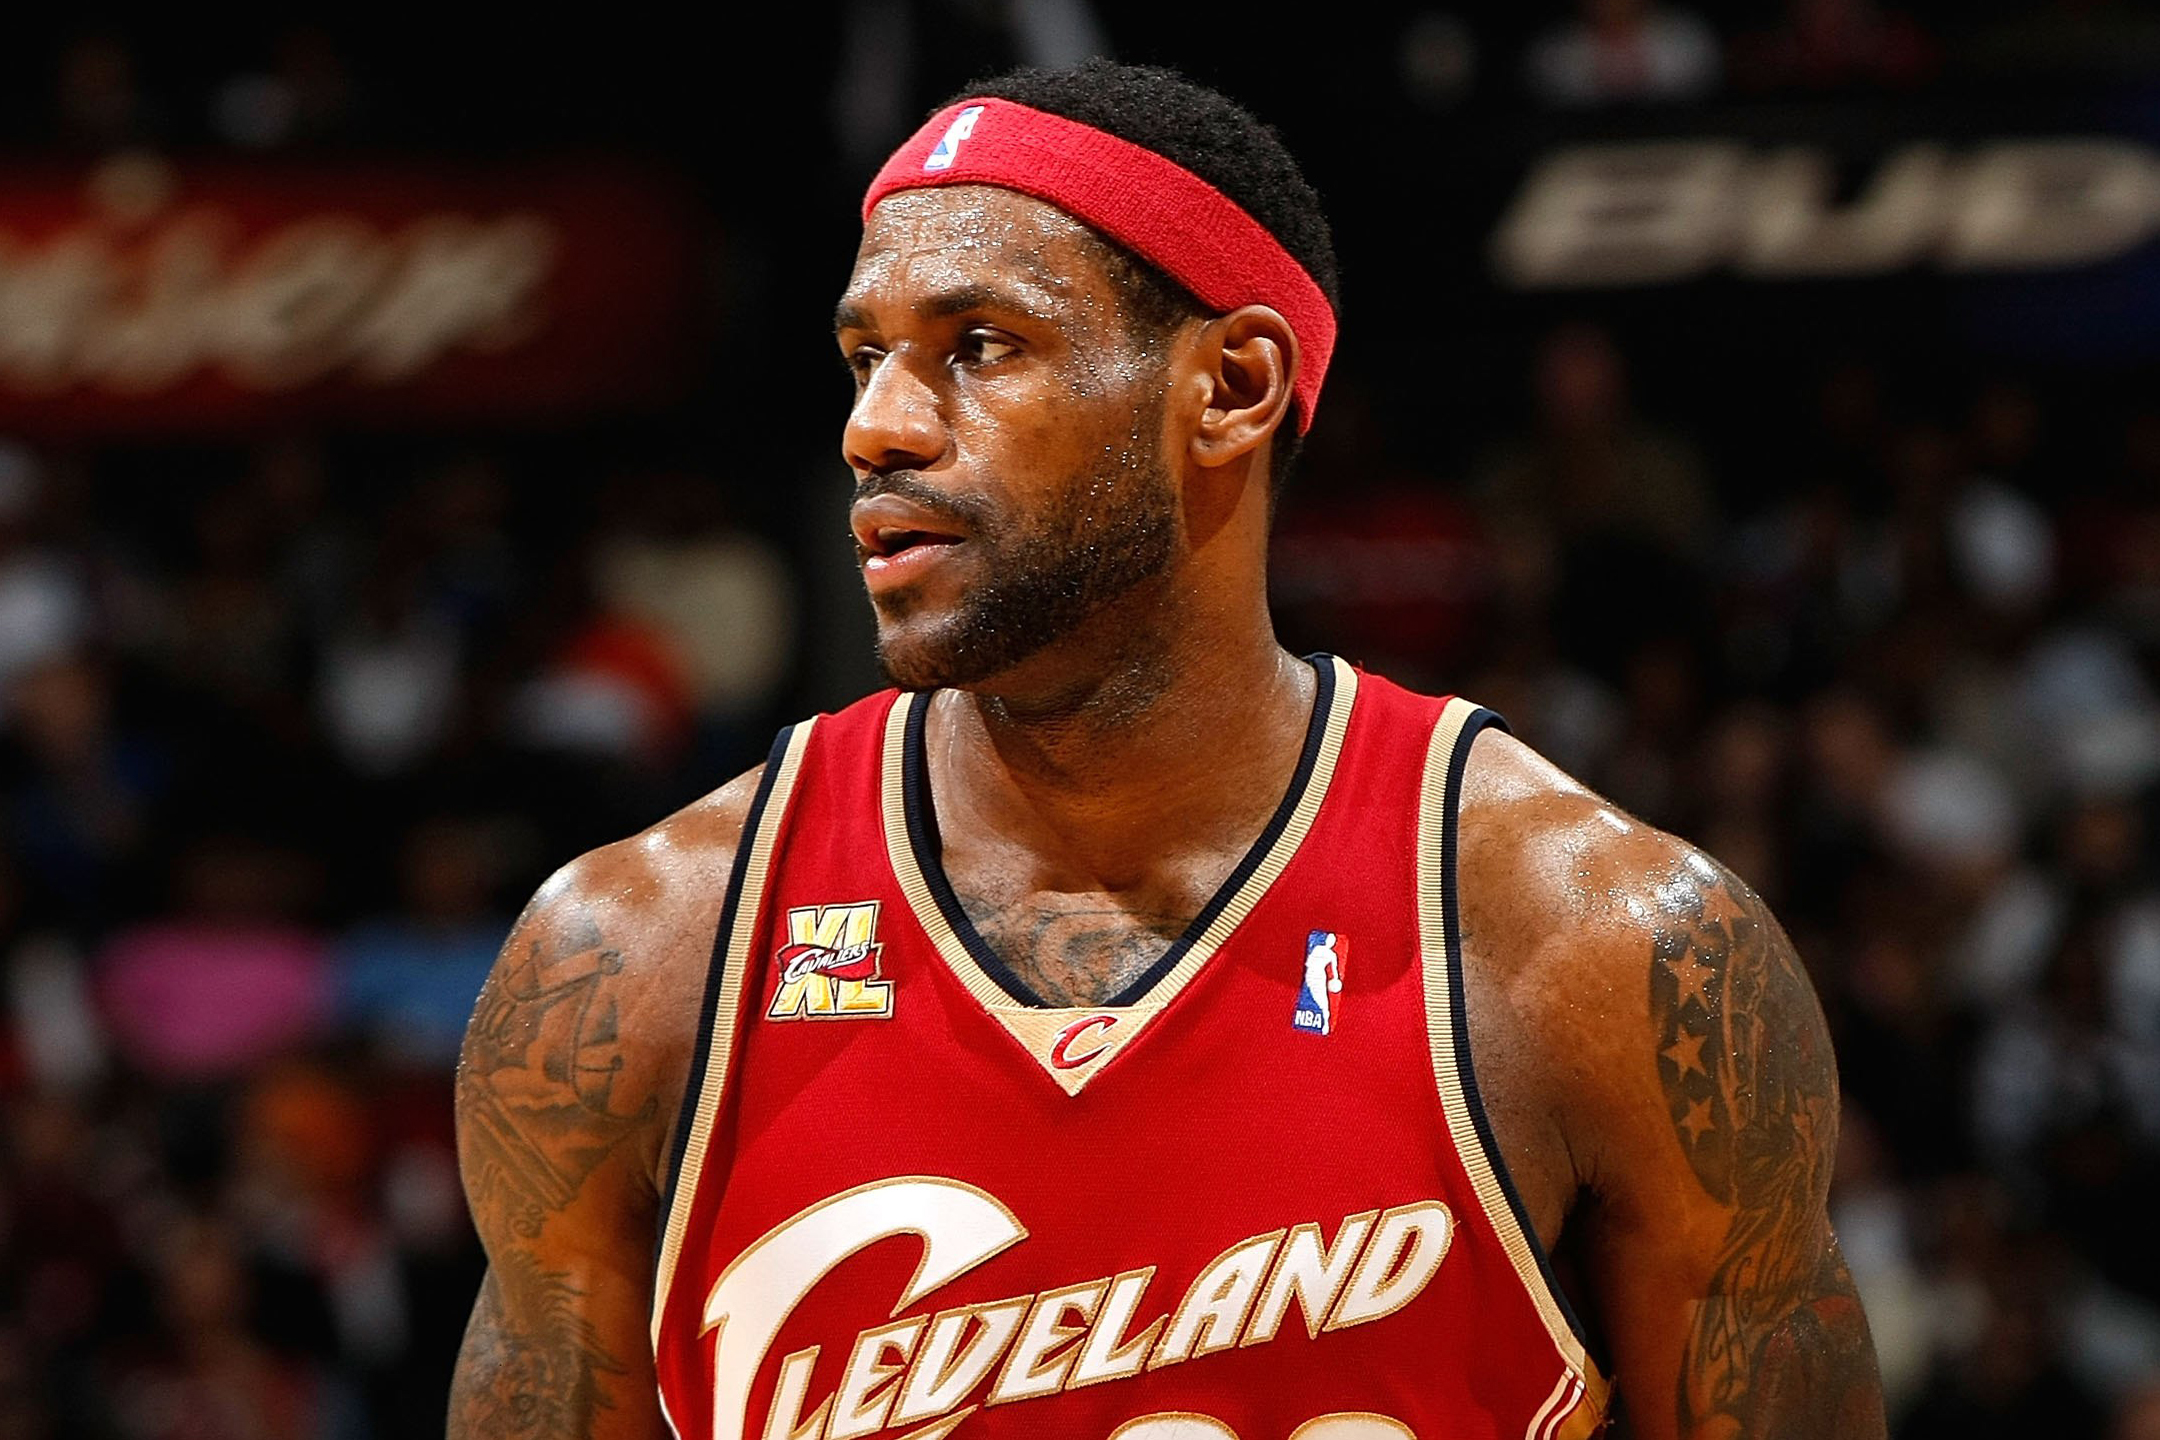 LeBron James of the Cleveland Cavaliers against the Atlanta Hawks at Philips Arena on December 29, 2009 in Atlanta, Georgia. (Kevin C. Cox—Getty Images)